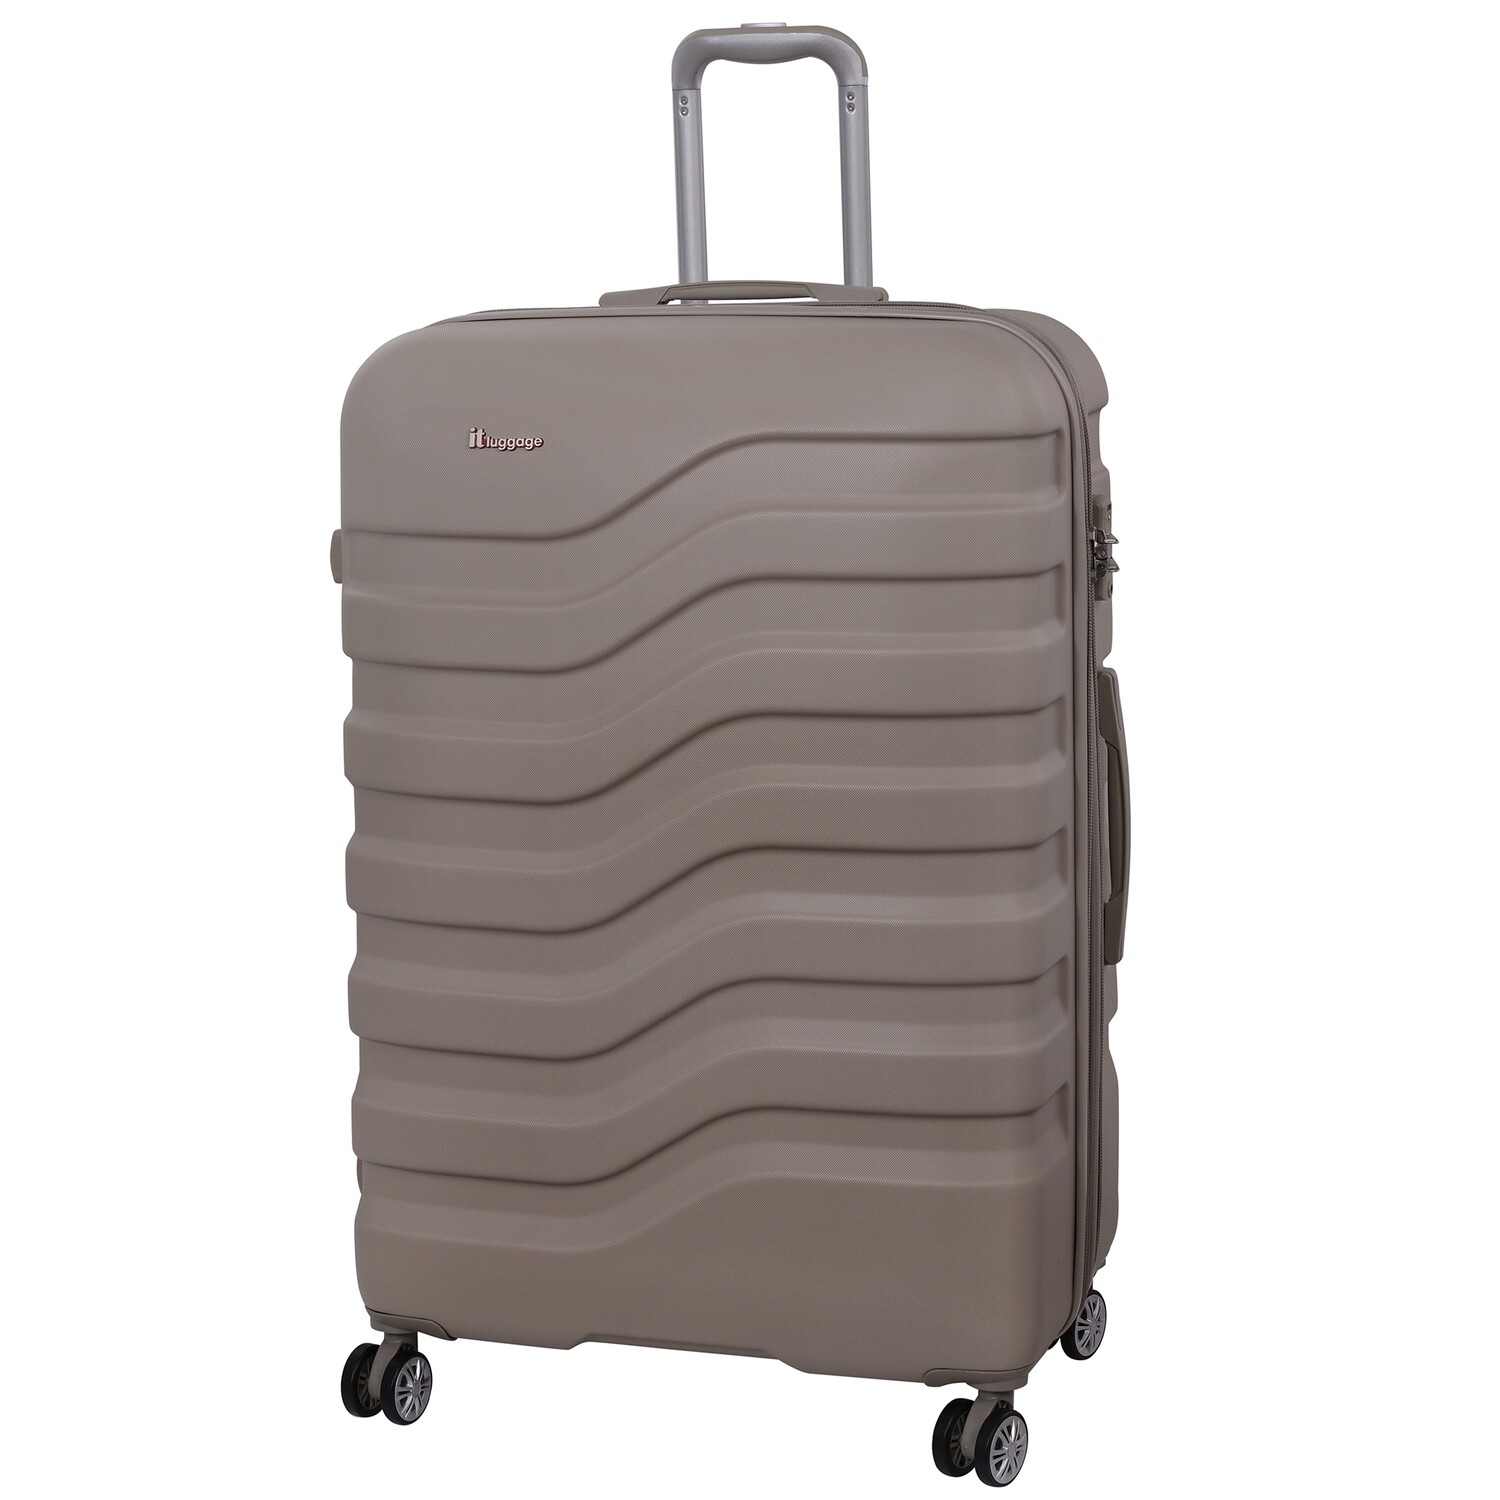 IT LUGGAGE SLIDER 30" STRONG TROLLEY COBBLESTONE